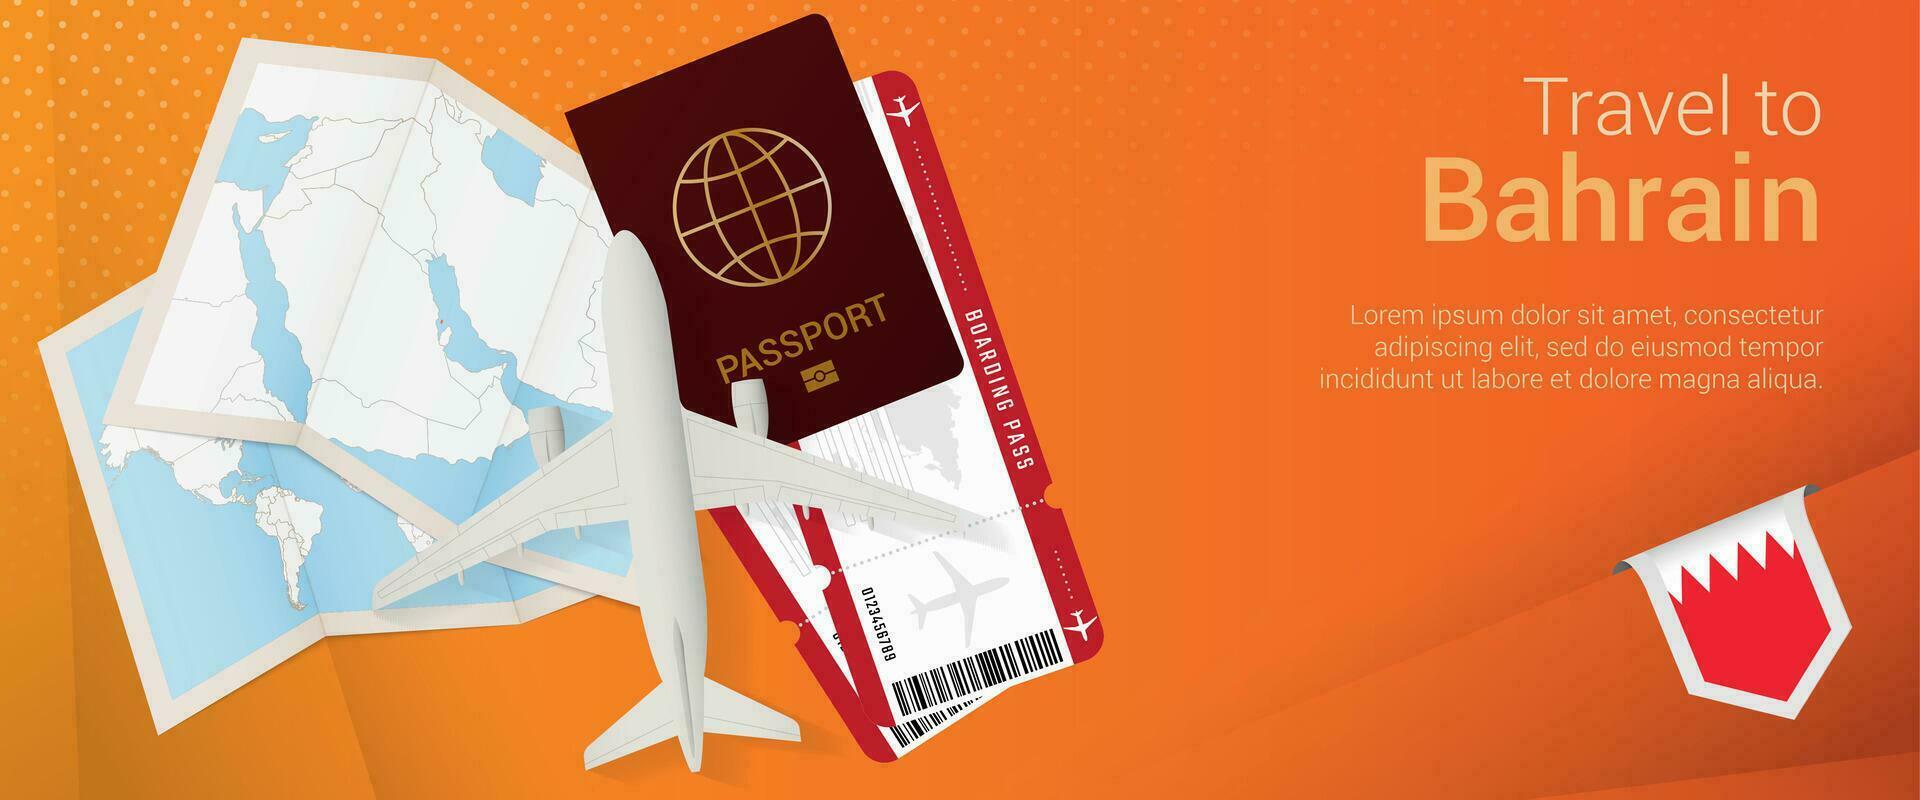 Travel to Bahrain pop-under banner. Trip banner with passport, tickets, airplane, boarding pass, map and flag of Bahrain. vector